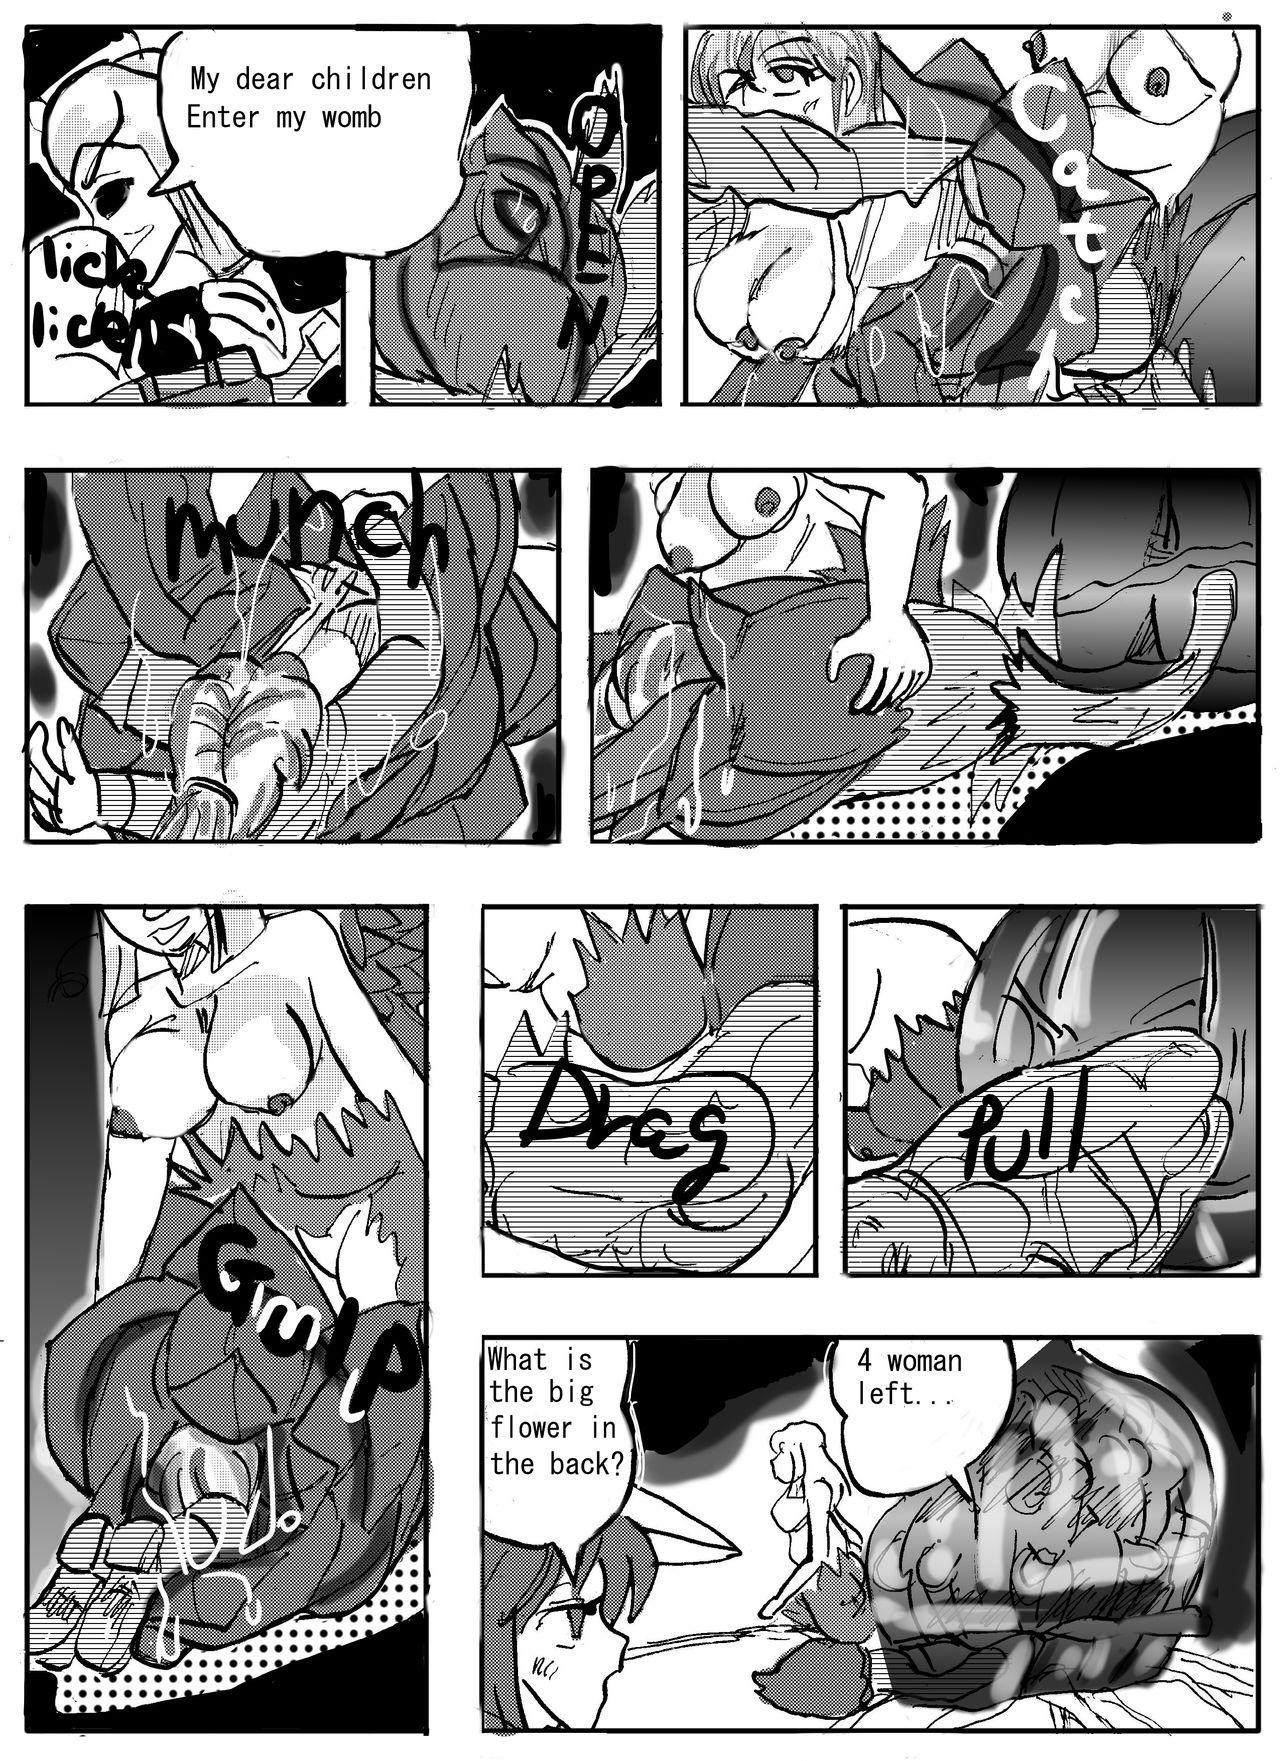 Dominicana Flower vore "Human and plant heterosexual ra*e and seed bed" - Original Flashing - Page 7